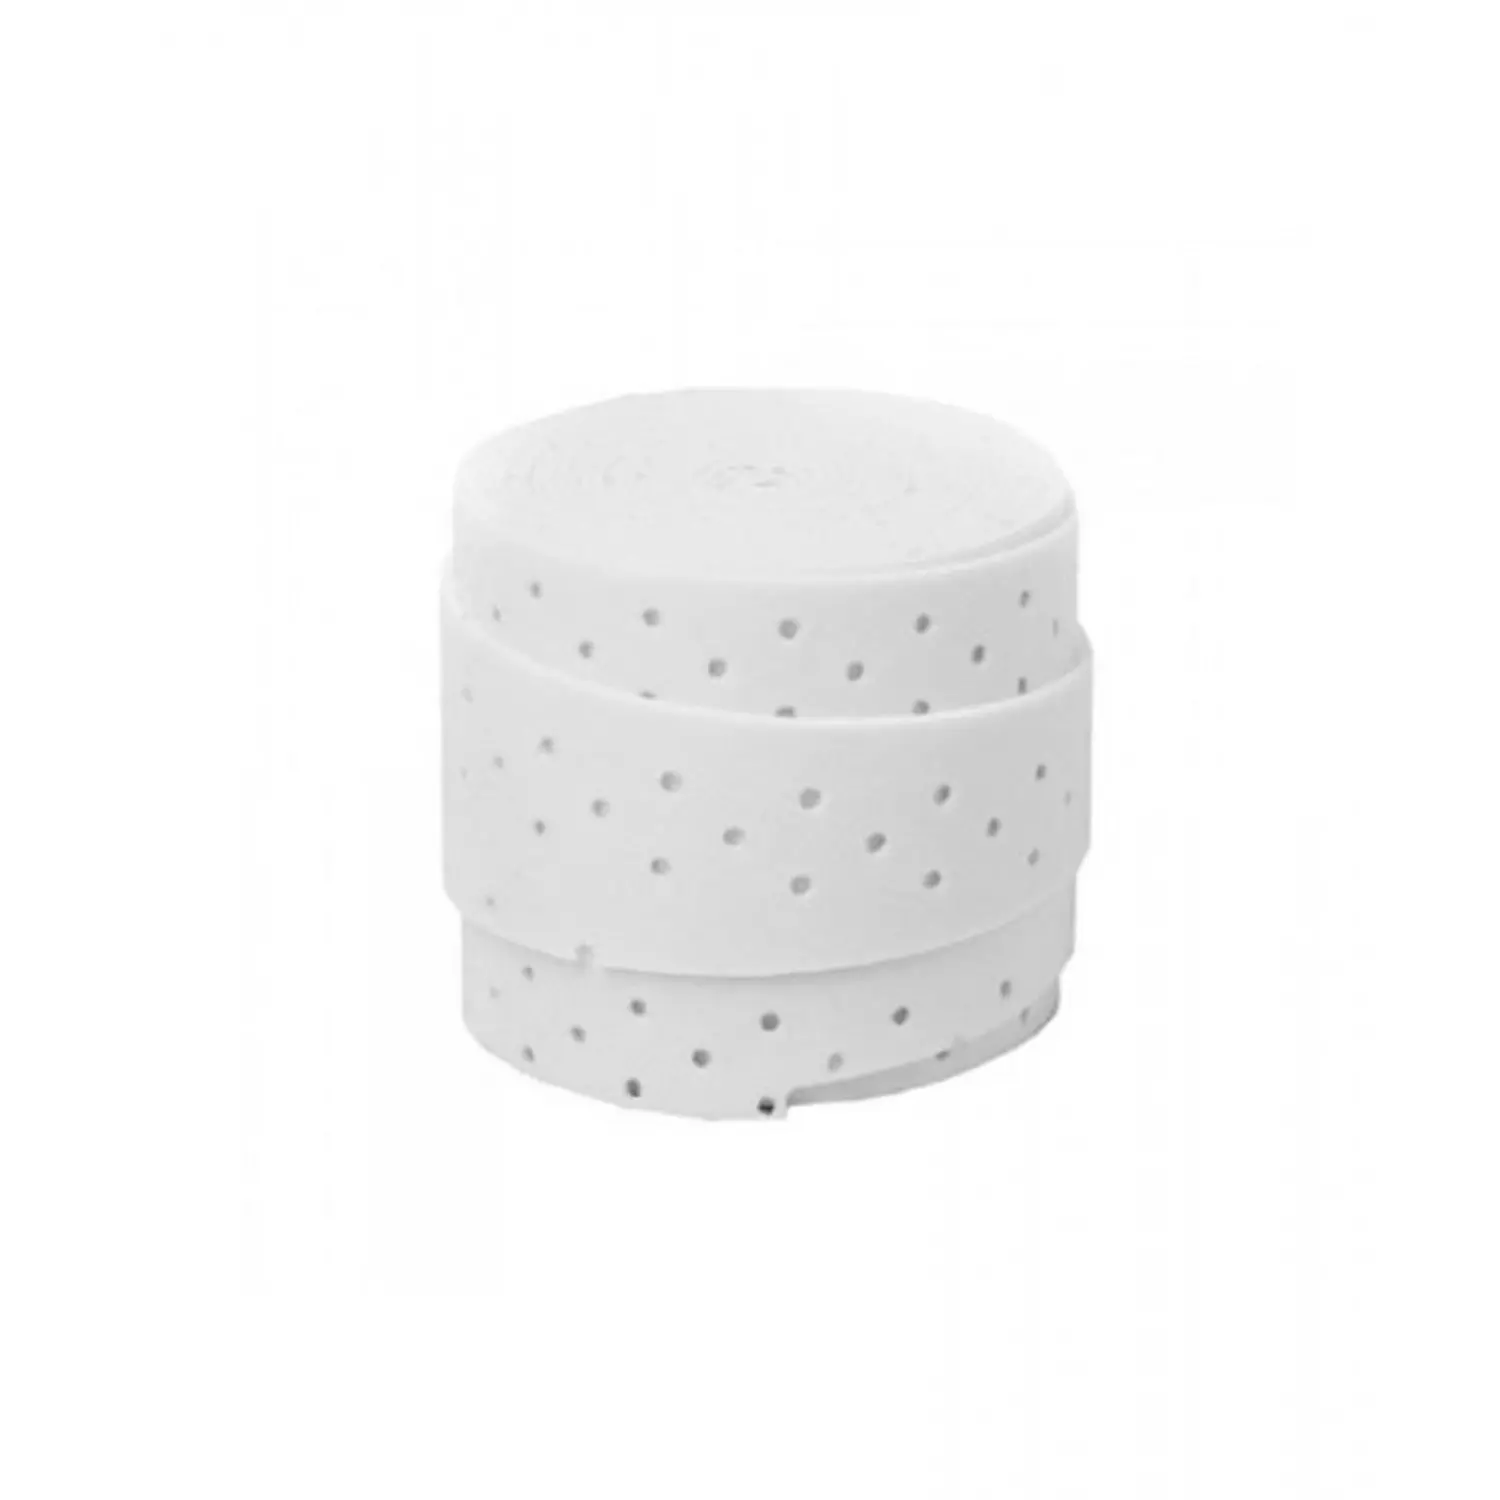 Wilson Pro Perforated Feel White Overgrip hover image